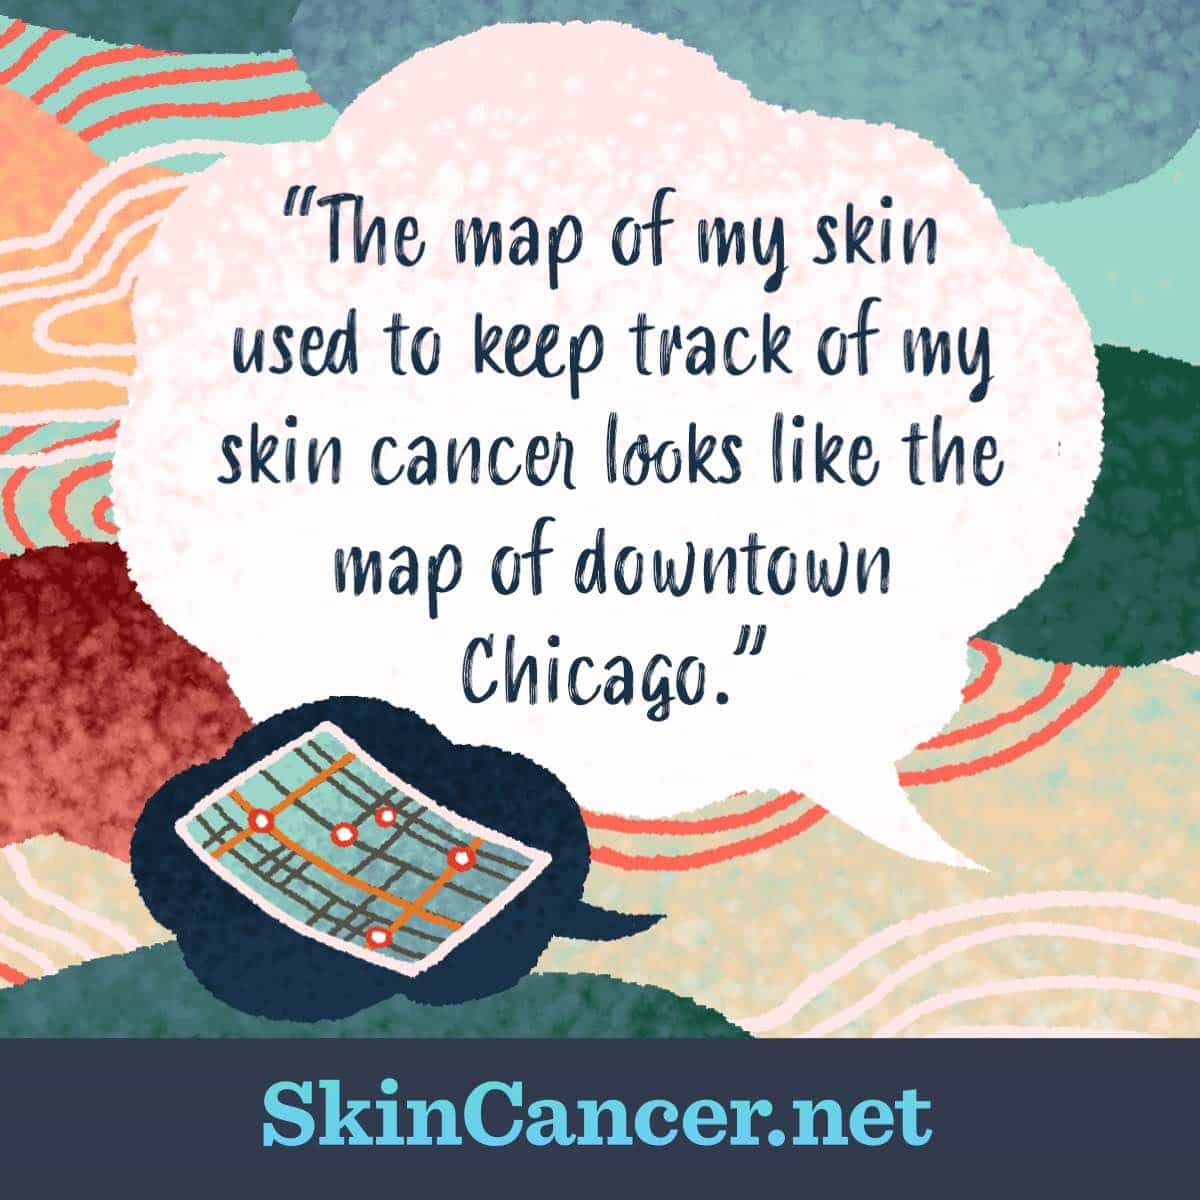 The map of my skin used to keep track of my skin cancer looks like the map of downtown Chicago.